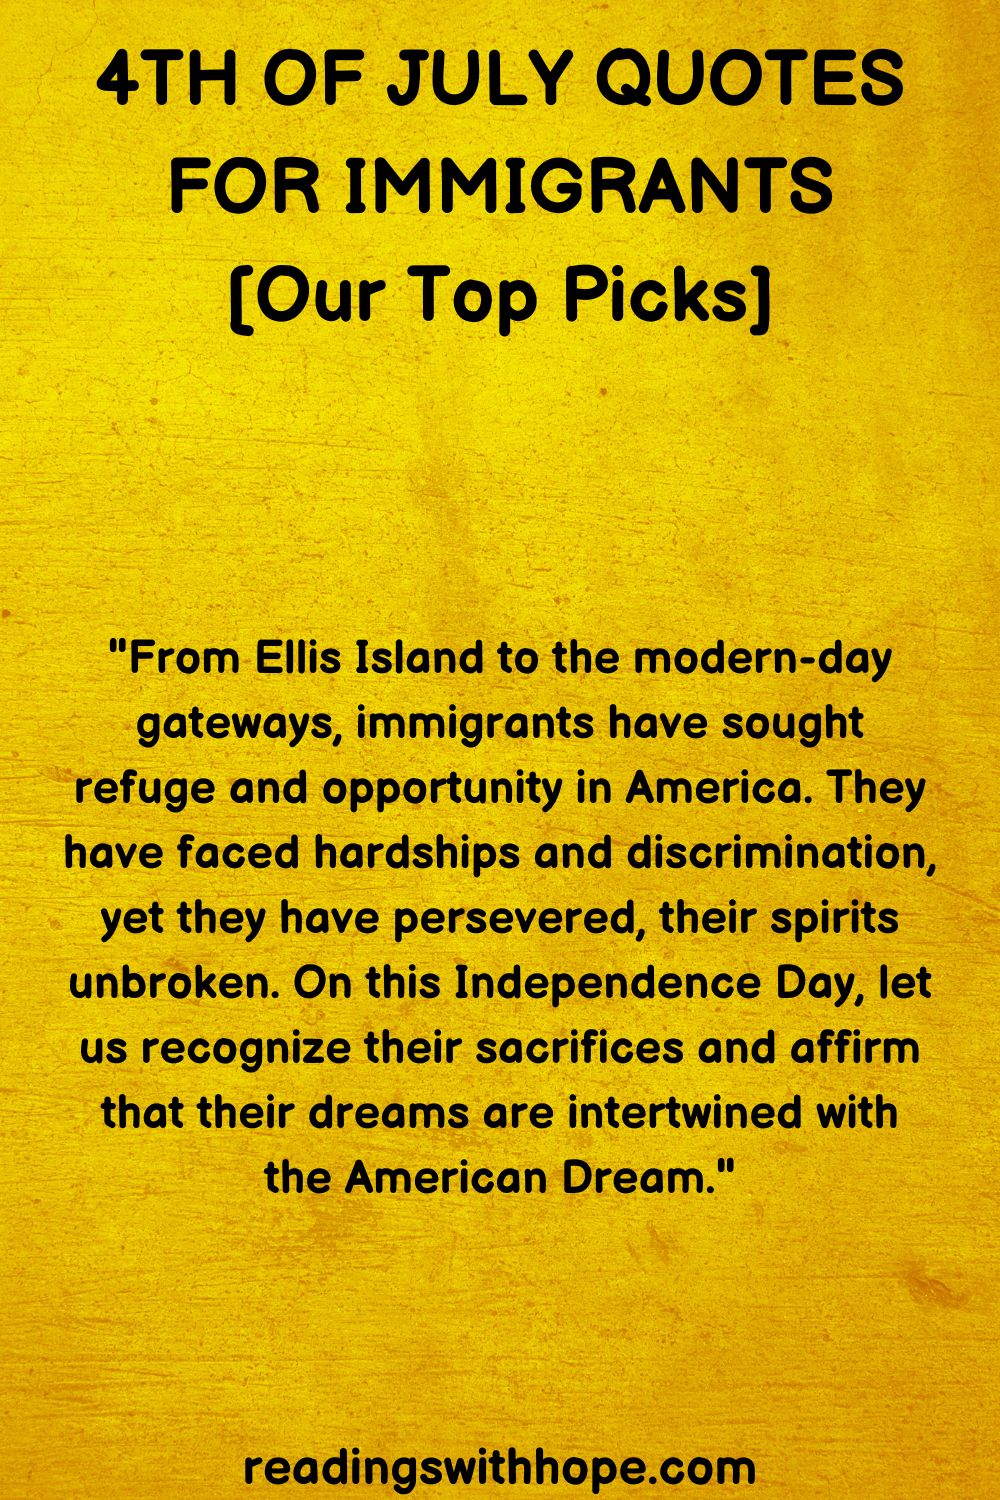 4th of July Quotes For Immigrants